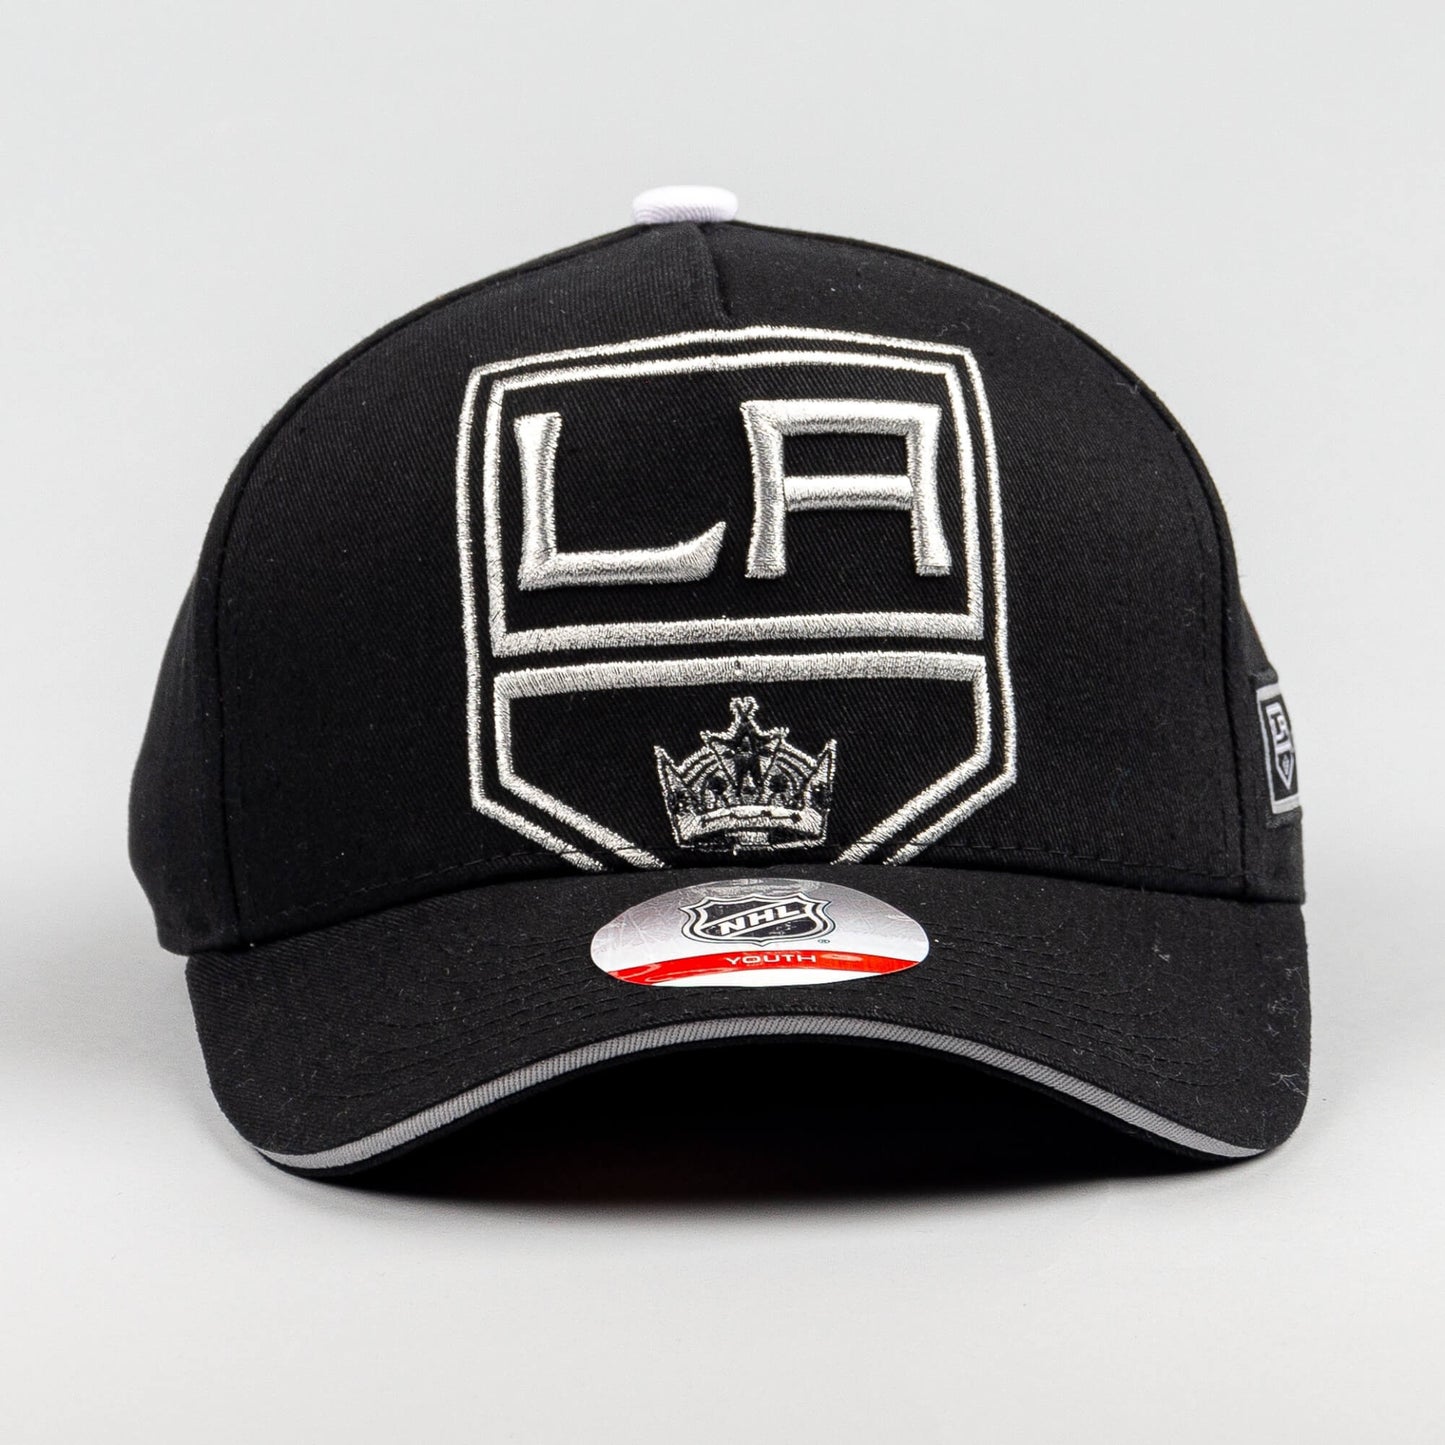 Outer Stuff NHL Big-Face Precurved Snap Kings Black